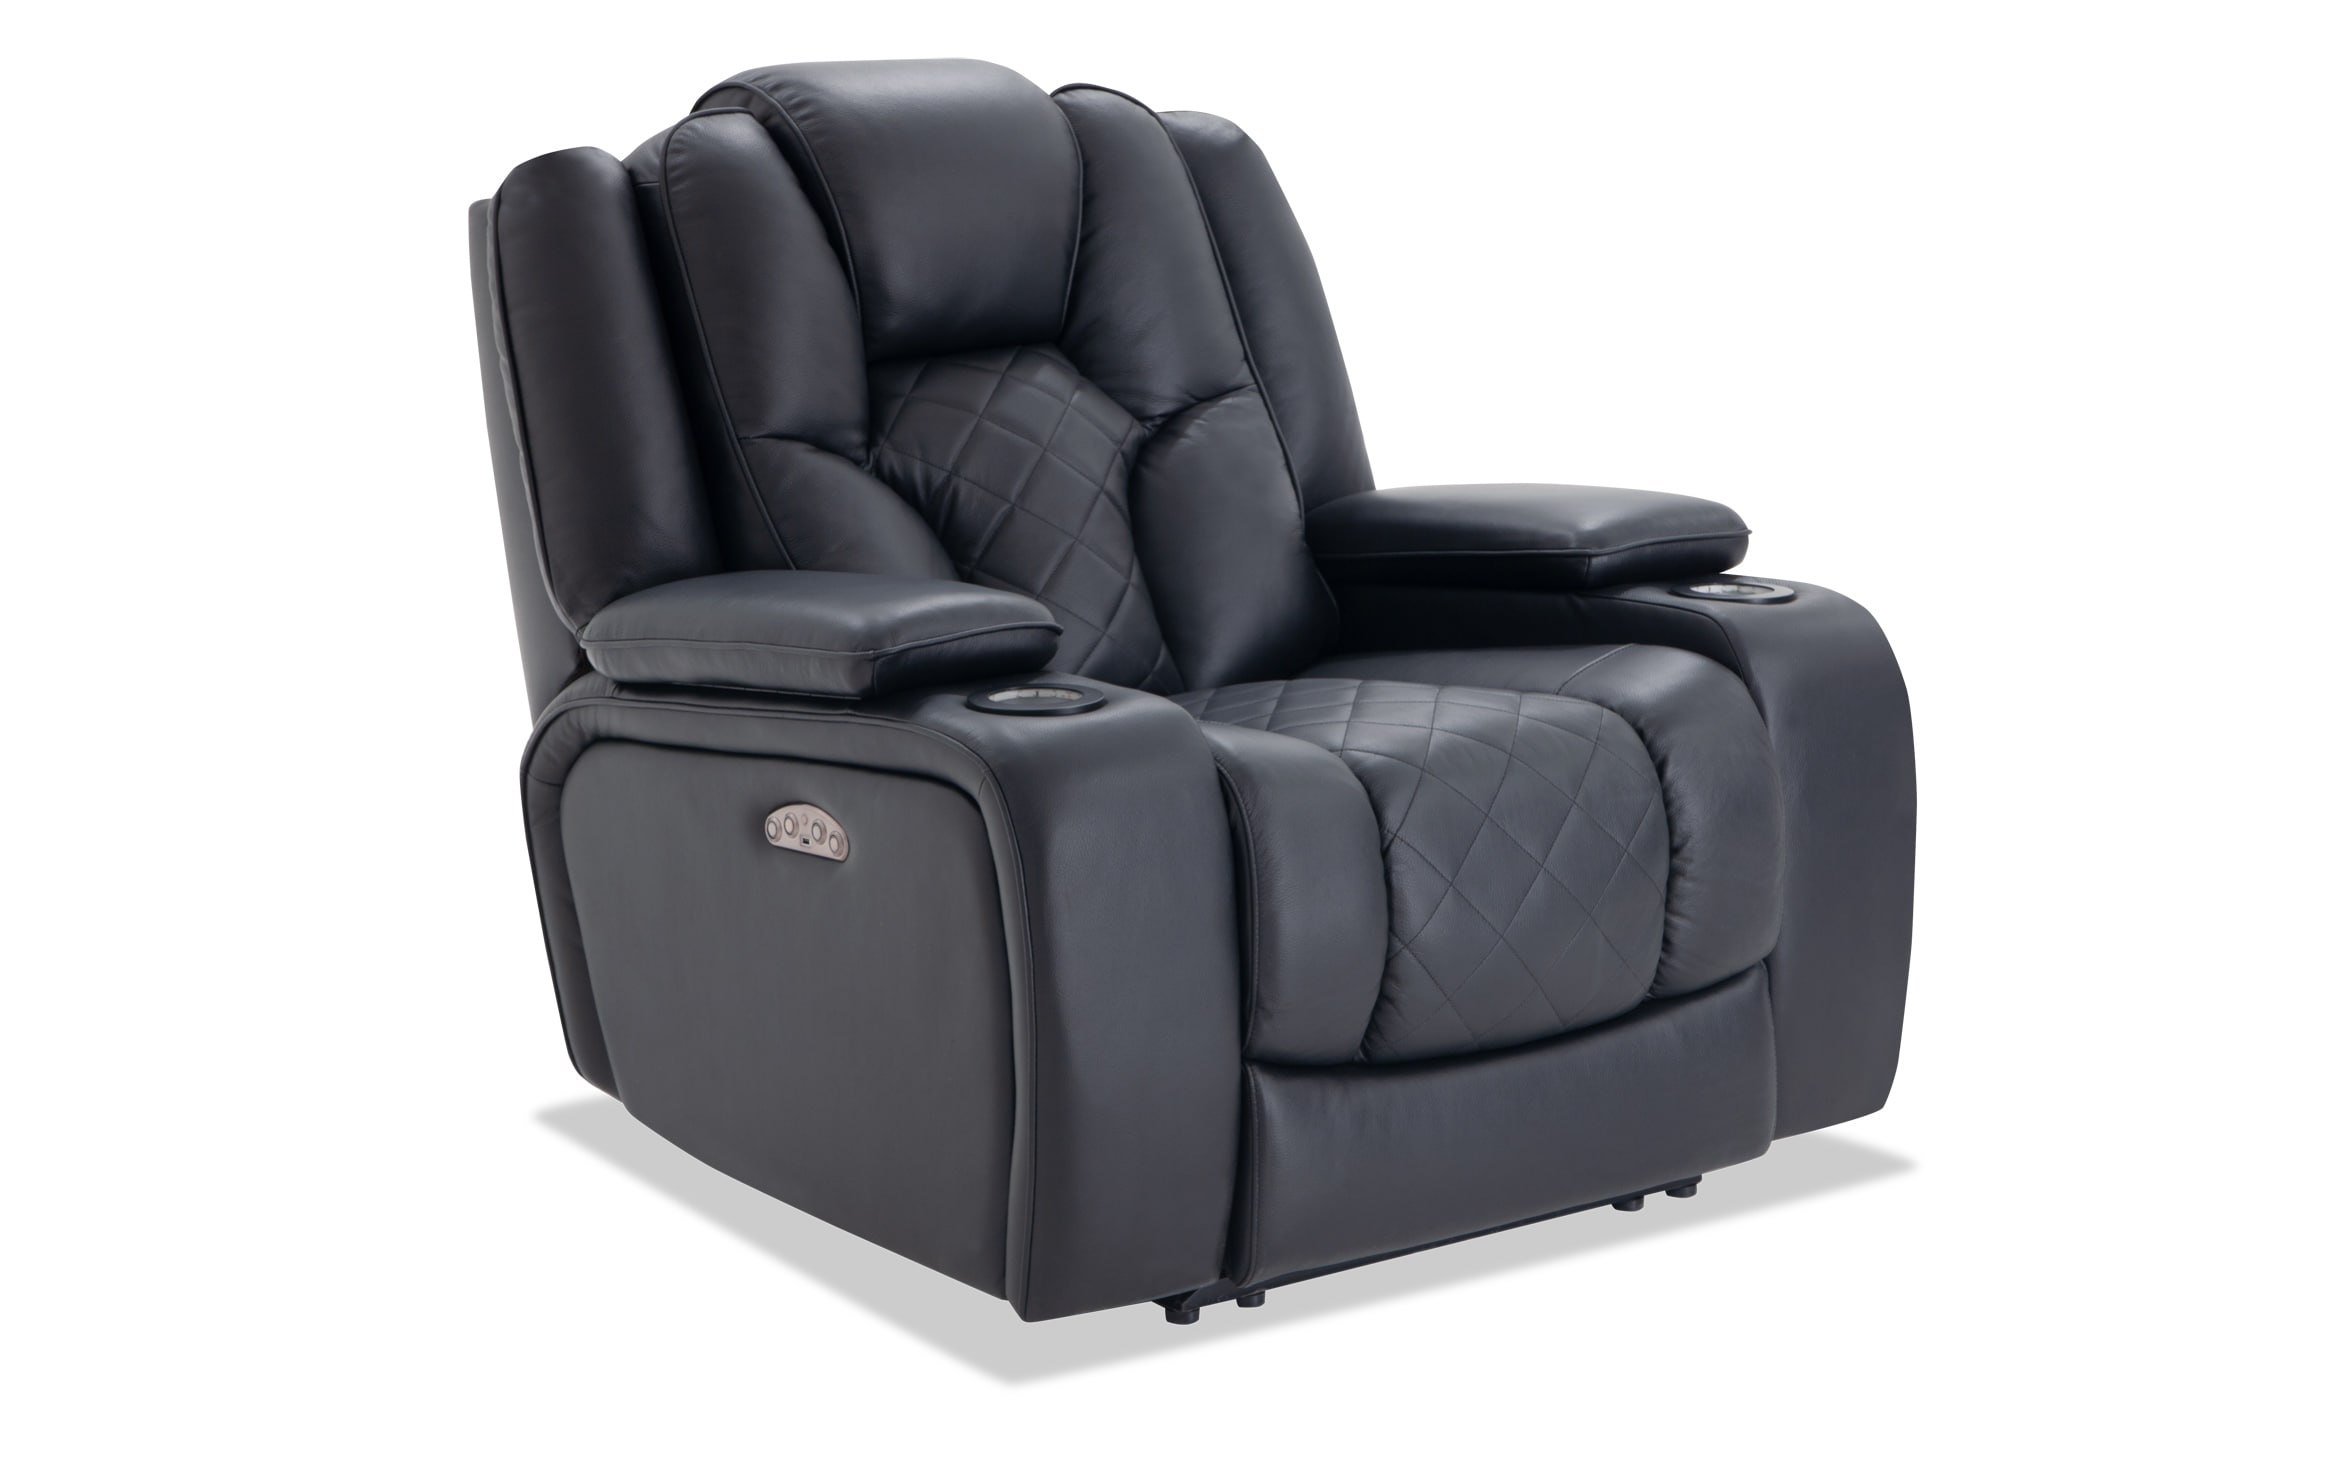 black leather comfy chair